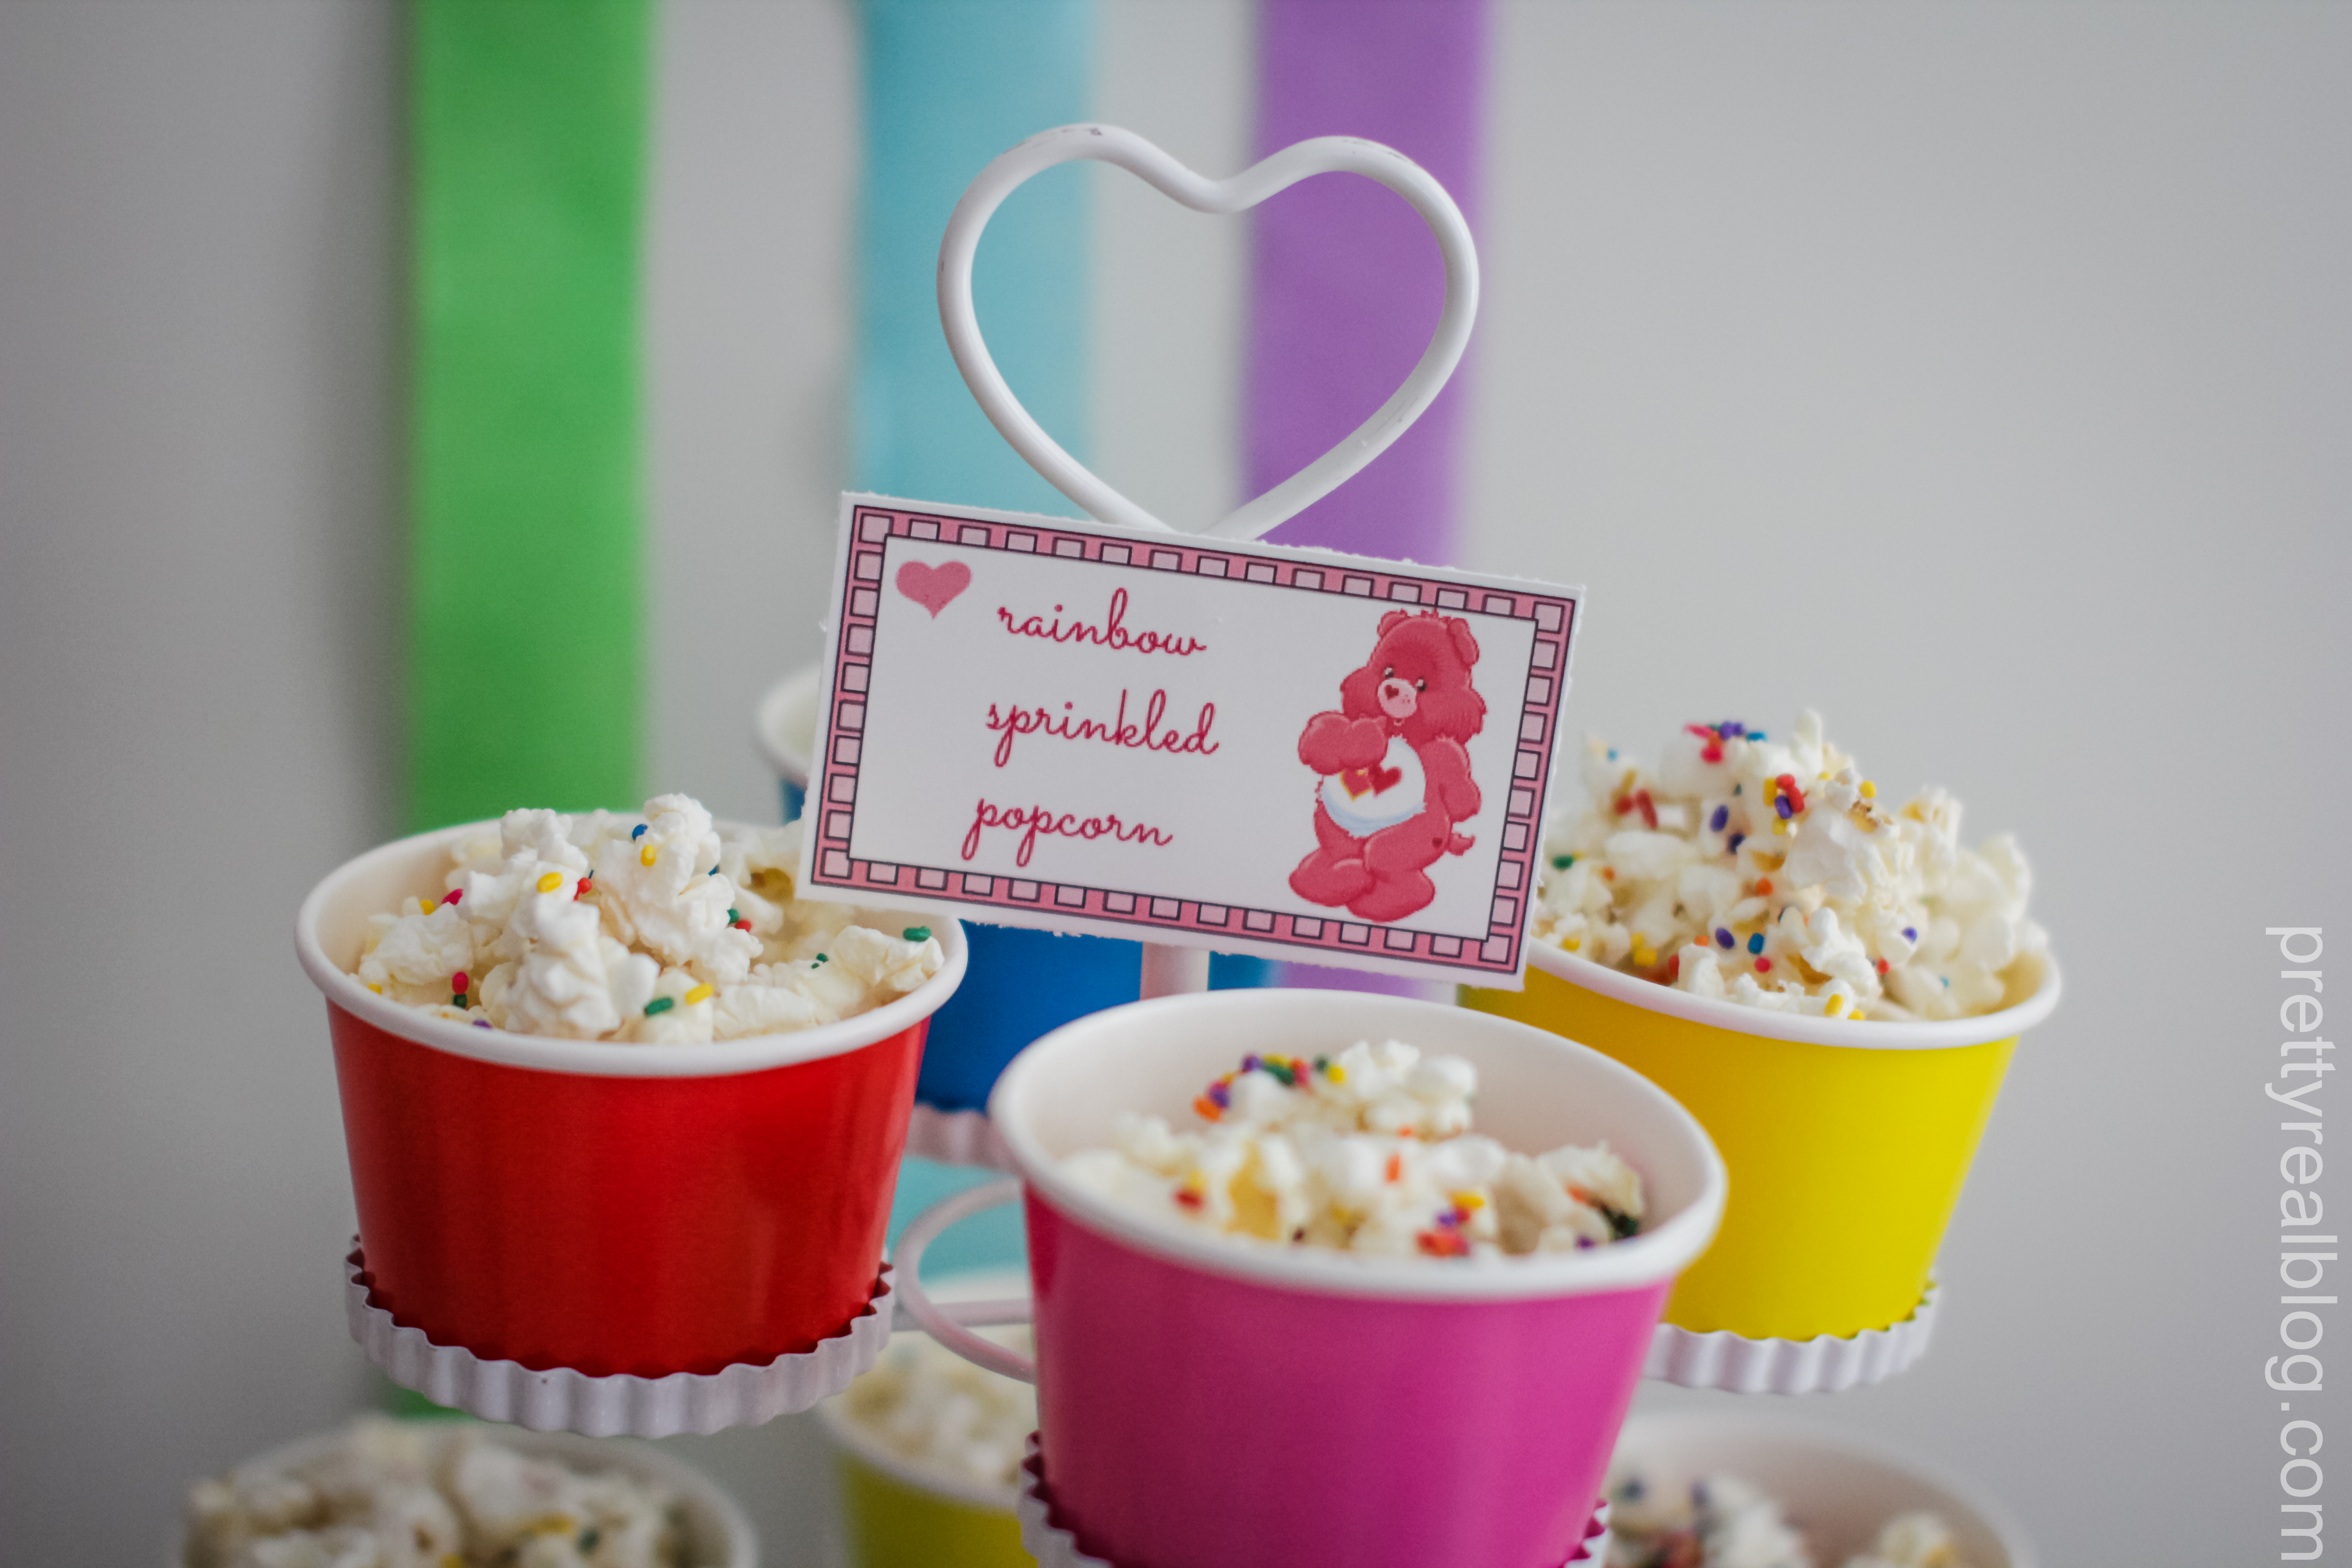 Genevieve's 'Let's Make a Rainbow' Care Bears Party - Project Nursery